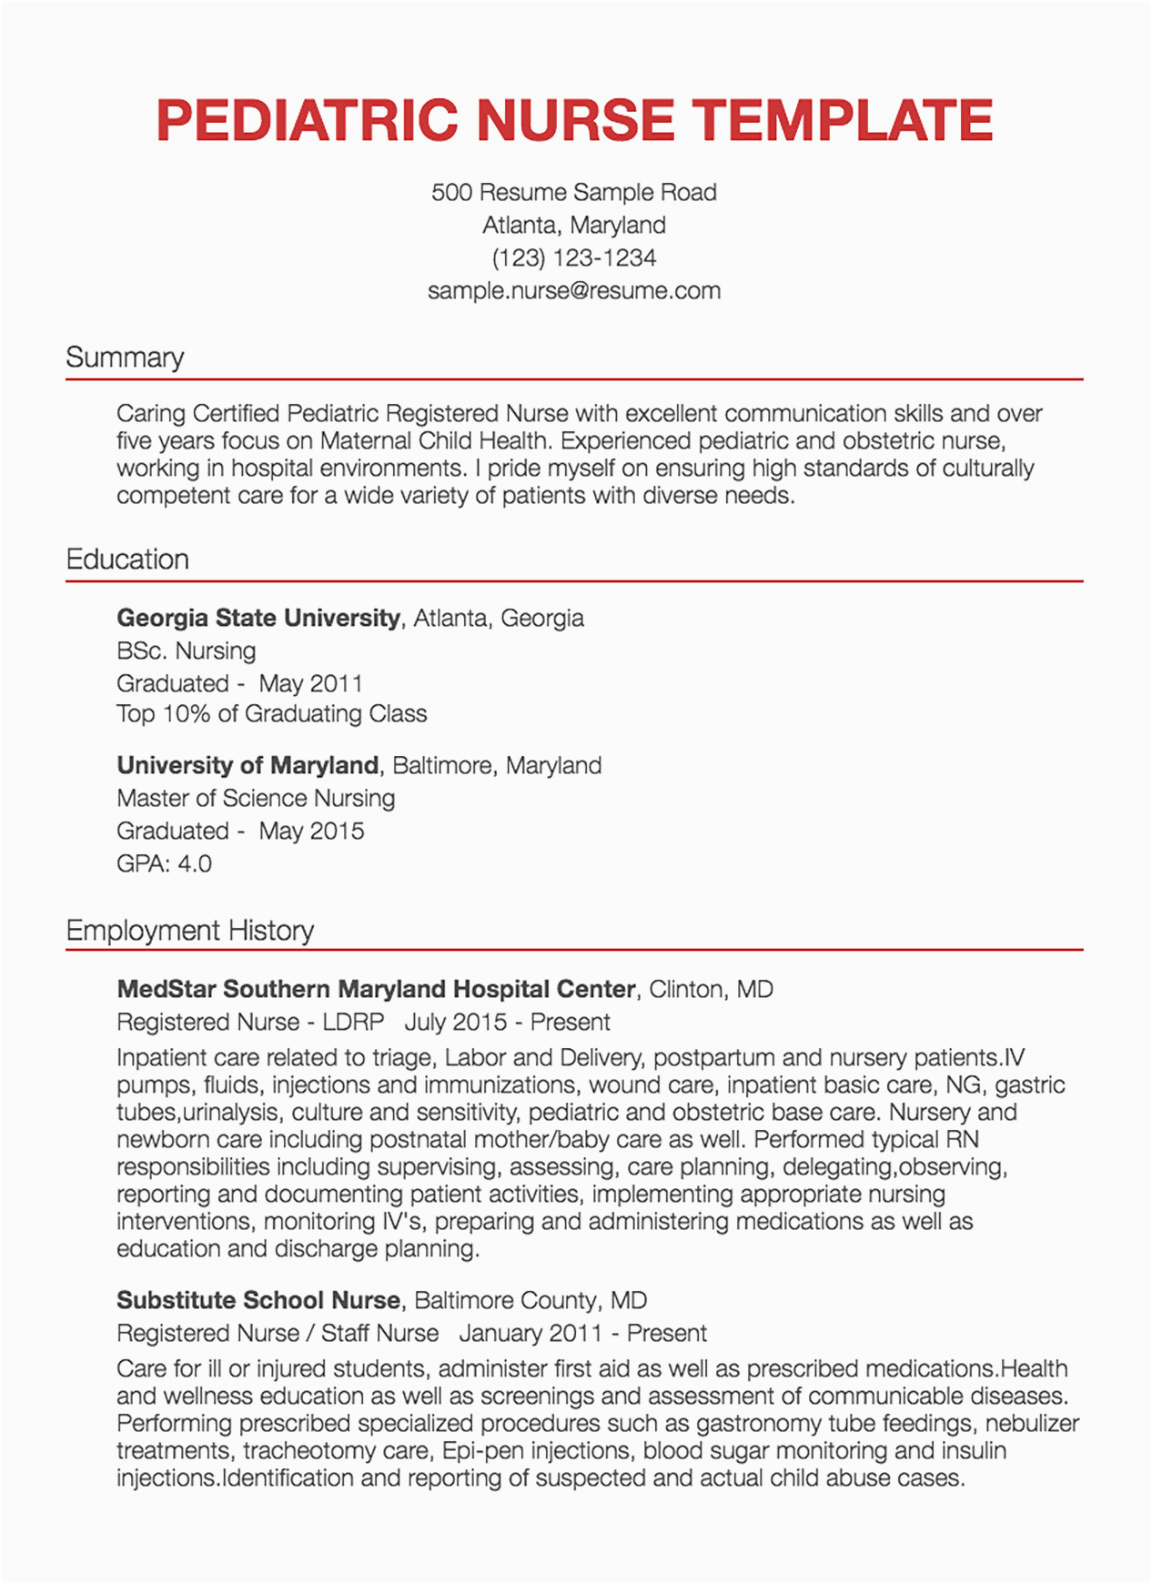 Sample Resume Of A Nurse Applicant 30 Nursing Resume Examples & Samples Written by Rn